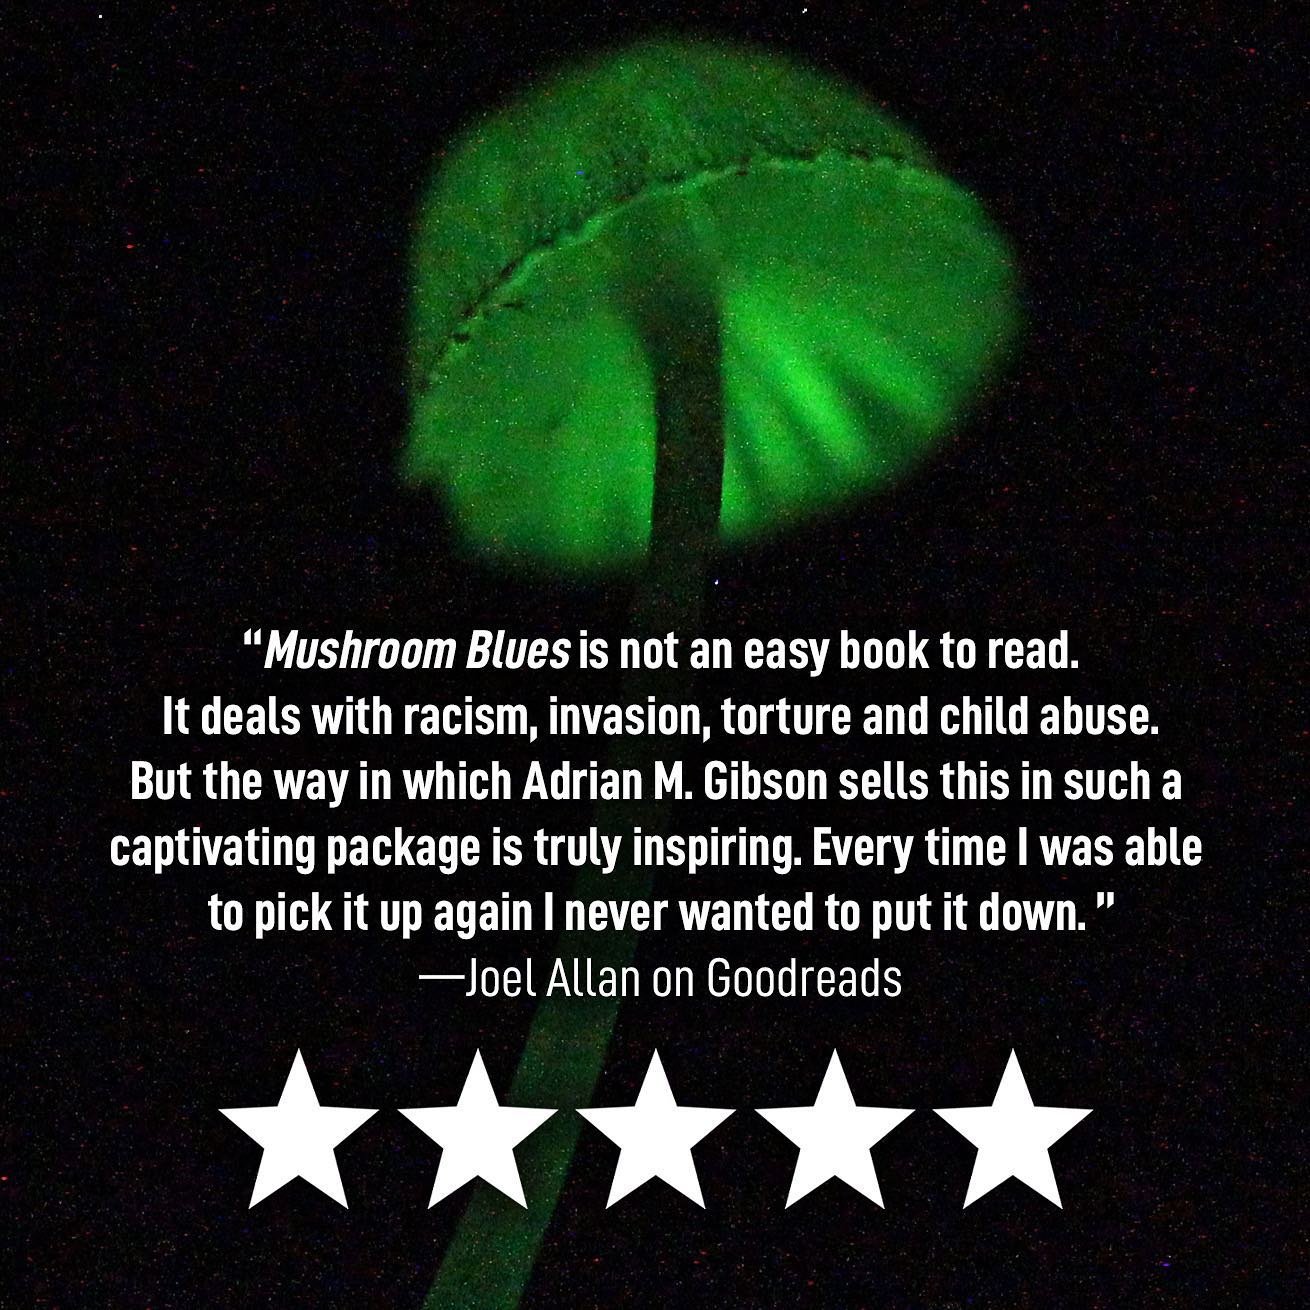 Reader Joel Allan with this amazing 5-star review of #MushroomBlues. It makes me so happy when people connect with the book on this level. Thank you 🍄

BUY IT TODAY in paperback/hardcover/eBook on Amazon or read it FREE on Kindle Unlimited.
&bull;
&